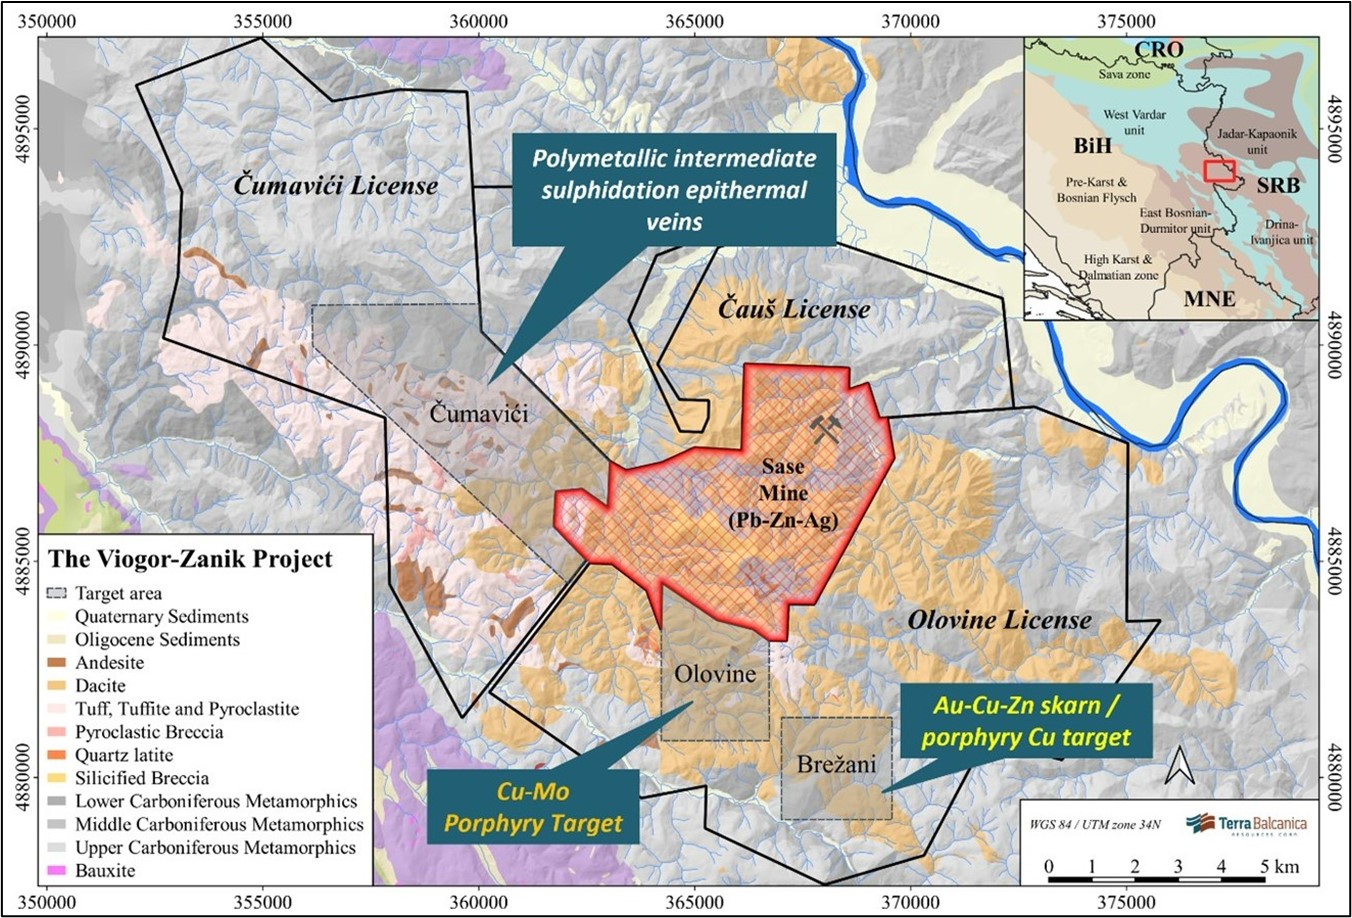 The Viogor-Zanik project with the key target areas: Cumavici, Olovine and Brežani and their associated style of mineralisation